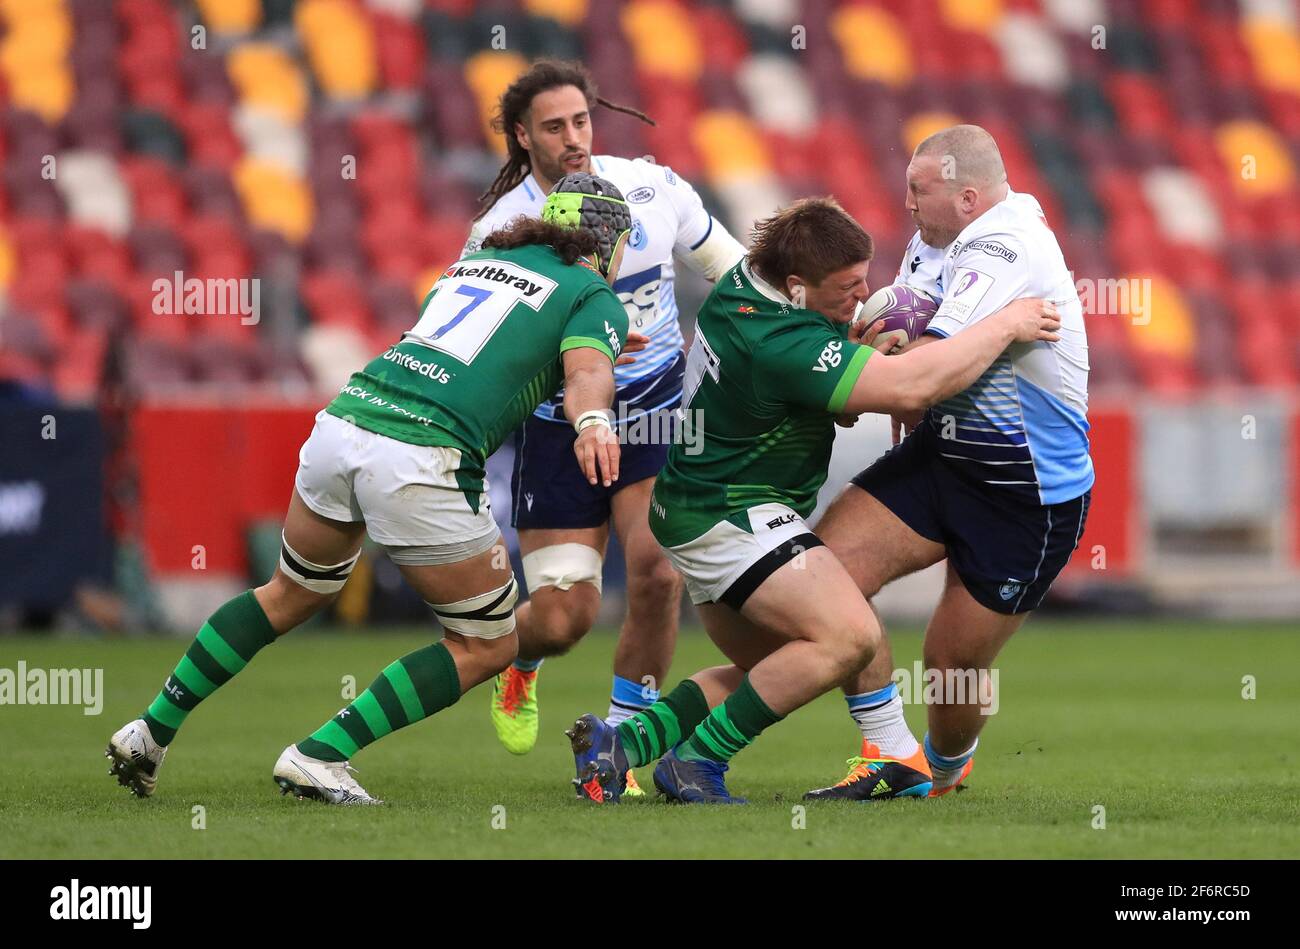 London Irish's William Goodrick-Clarke (second right) tackles Cardiff Blues's Dillon Lewis and results in a sending off following review, during the Heineken Challenge Cup match at the Brentford Community Stadium, London. Picture date: Friday April 2, 2021. Stock Photo